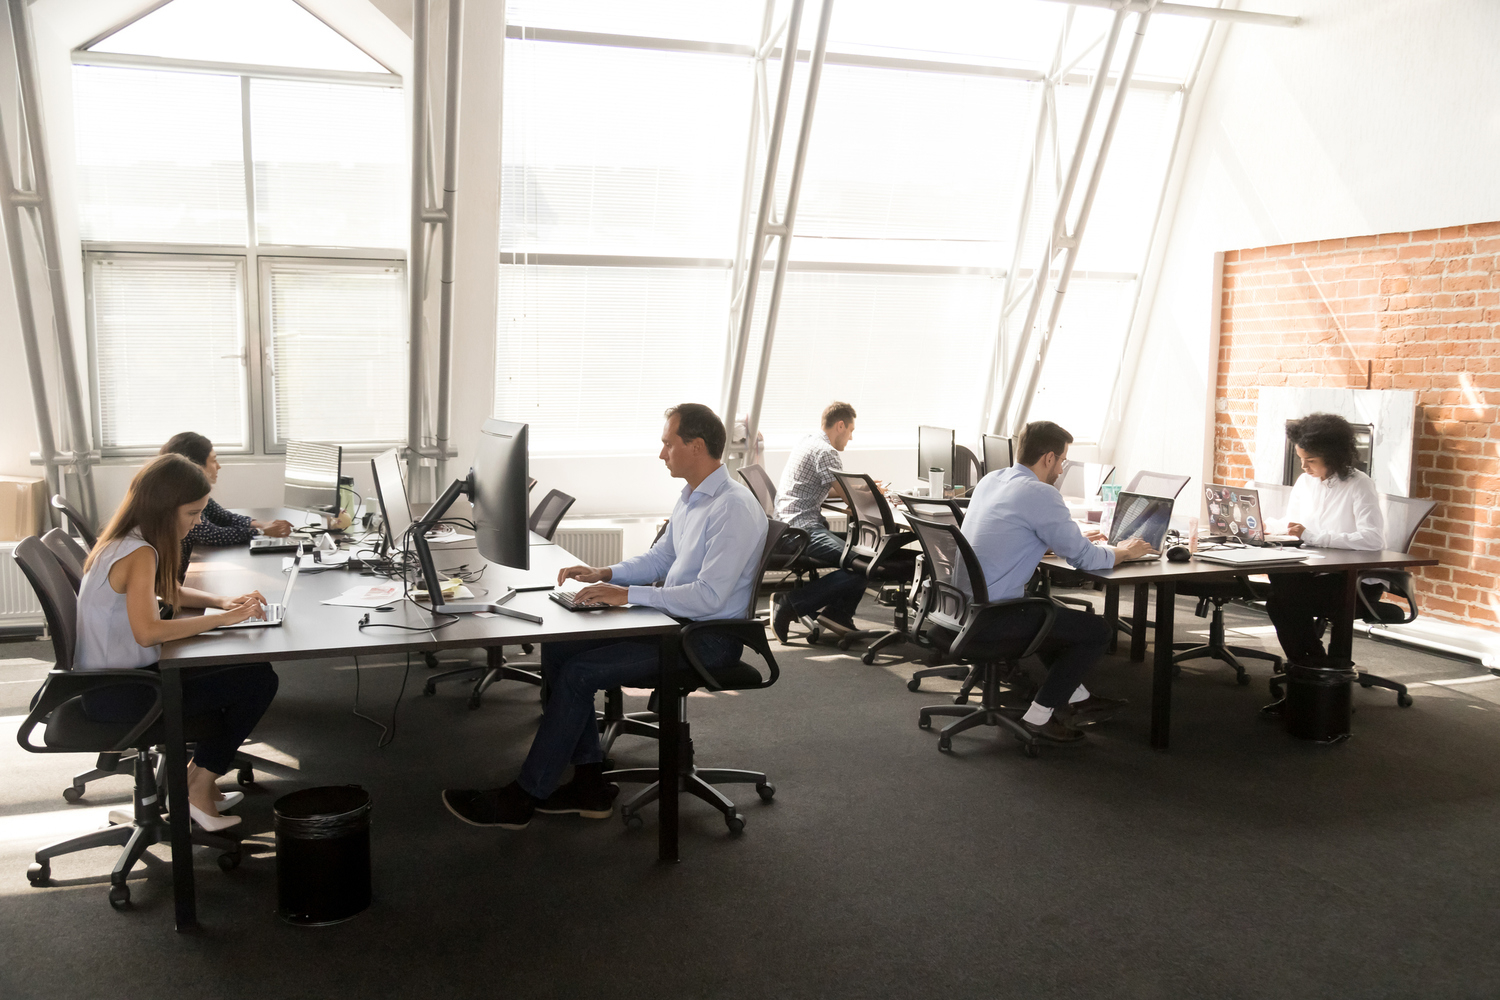 What Are The Benefits Of Shared Office Space Over Normal Rented Space?